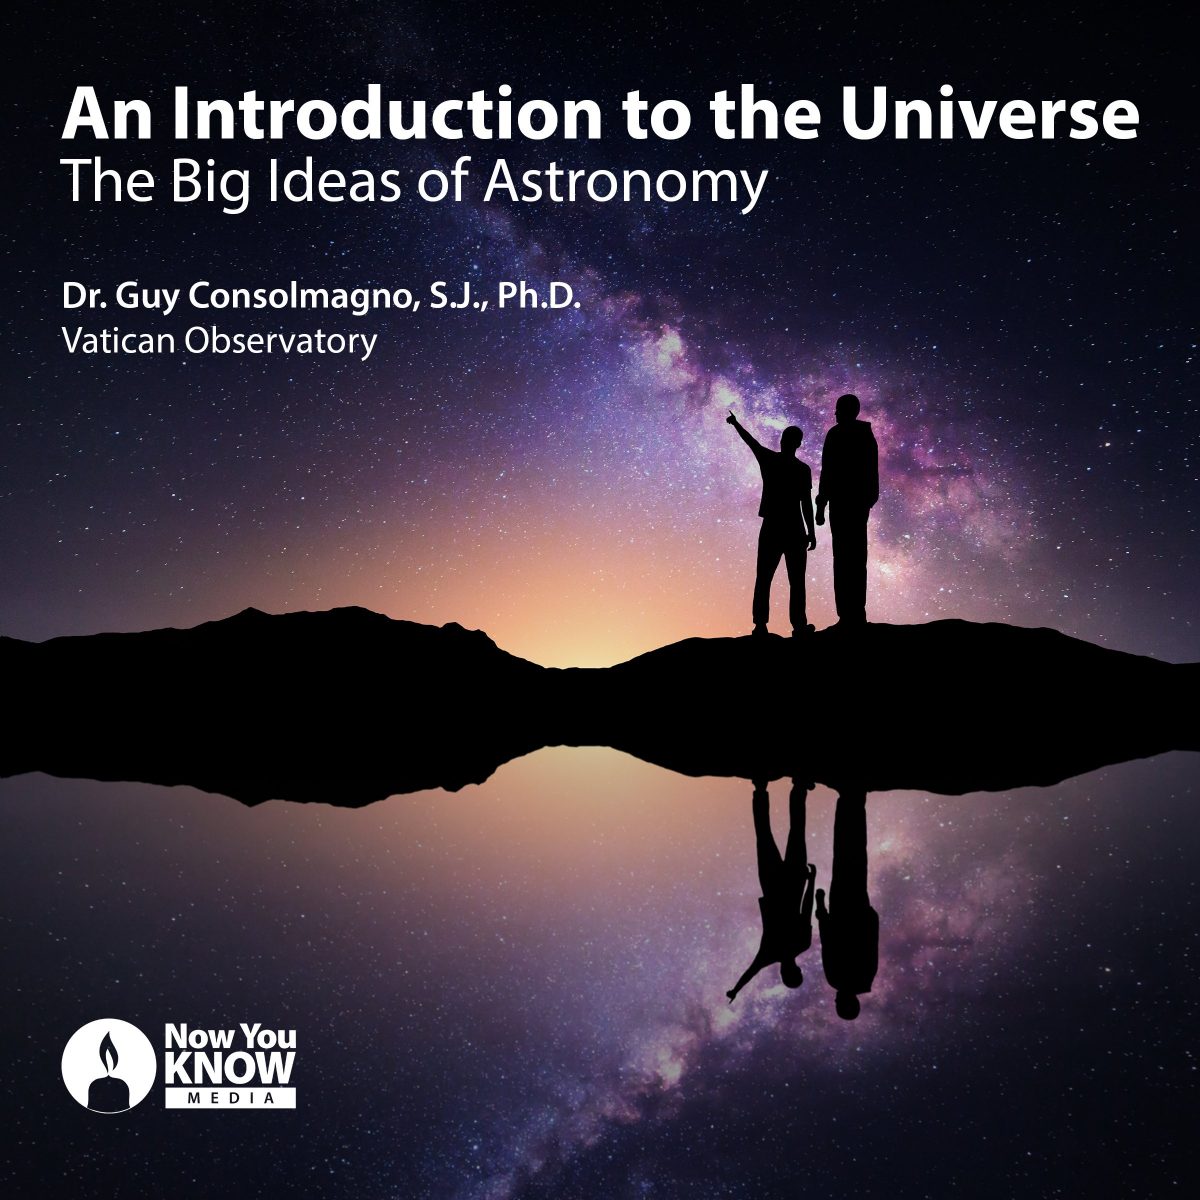 An introduction to astronomy book